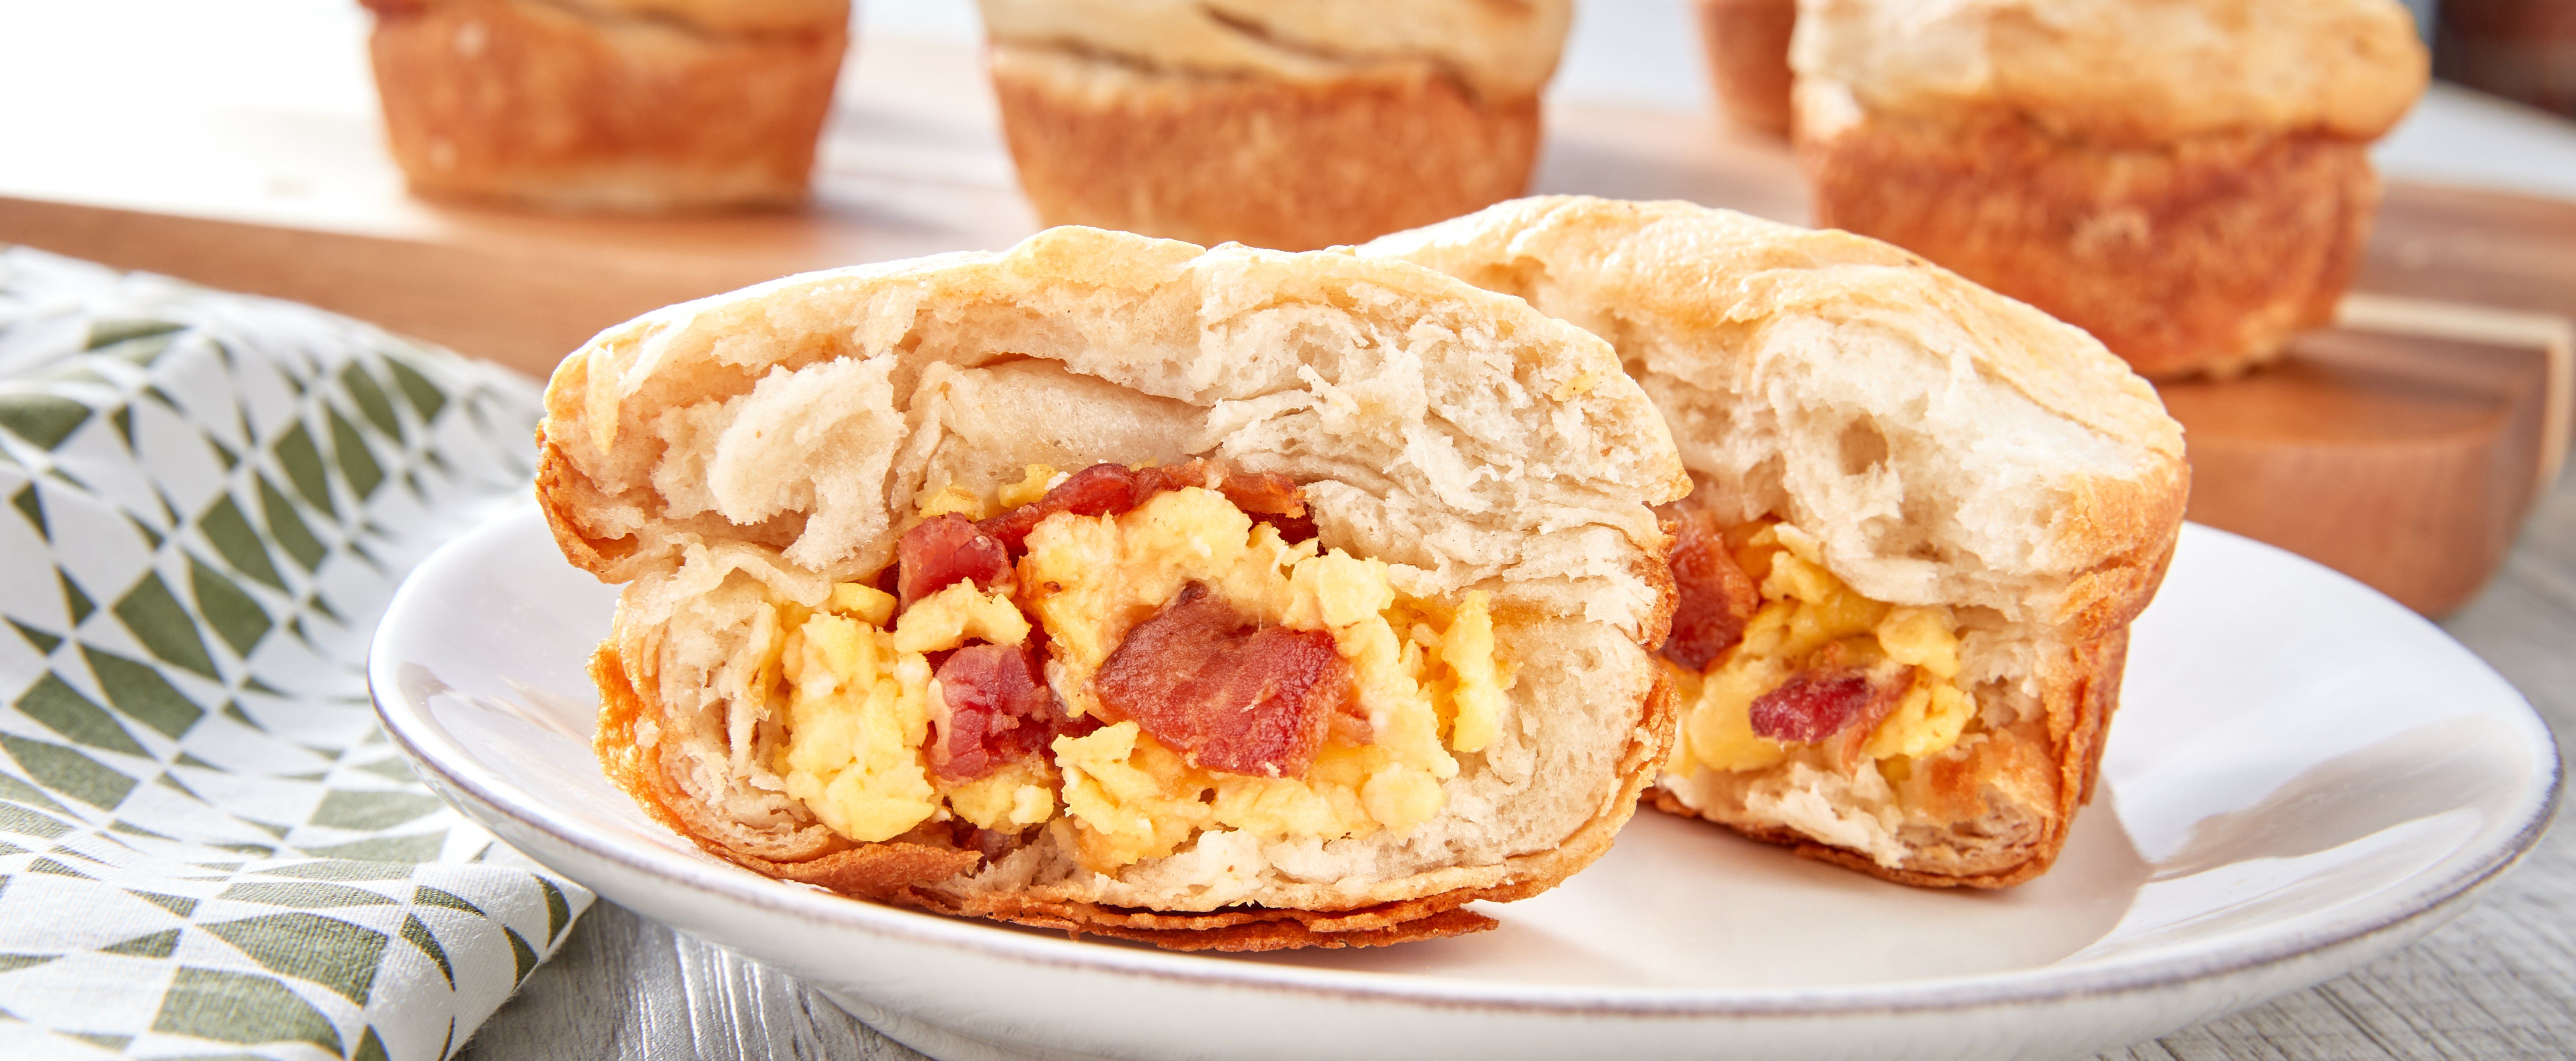 Bacon 'N Egg Stuffed Biscuits